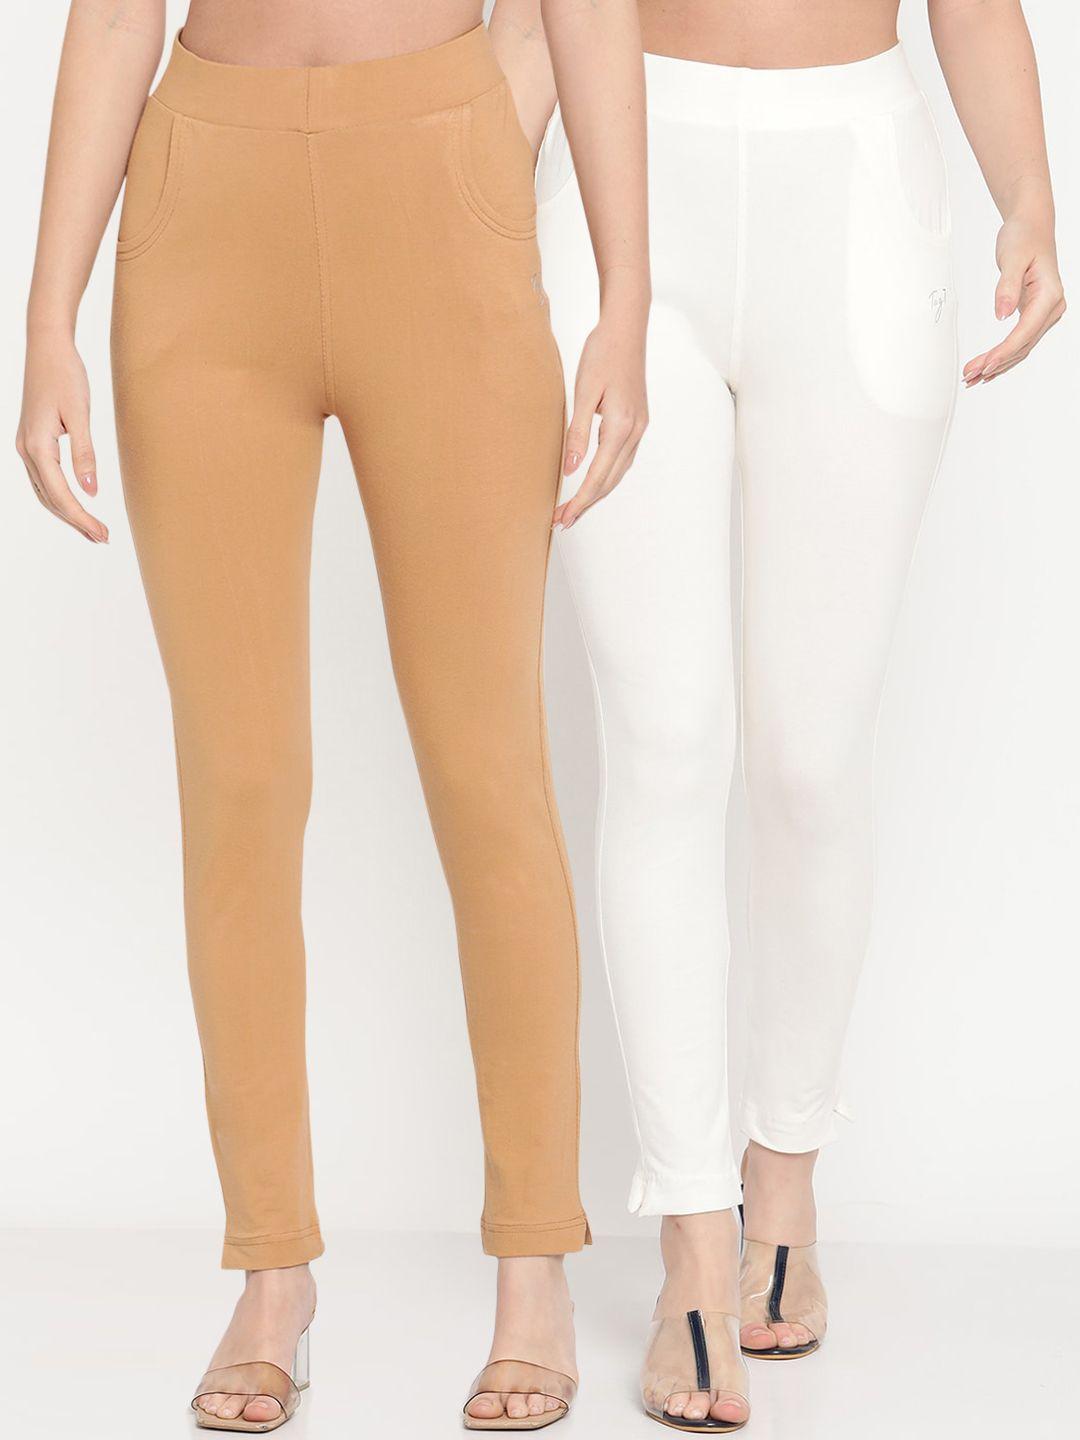 tag 7 pack of 2 off-white & beige ankle-length leggings